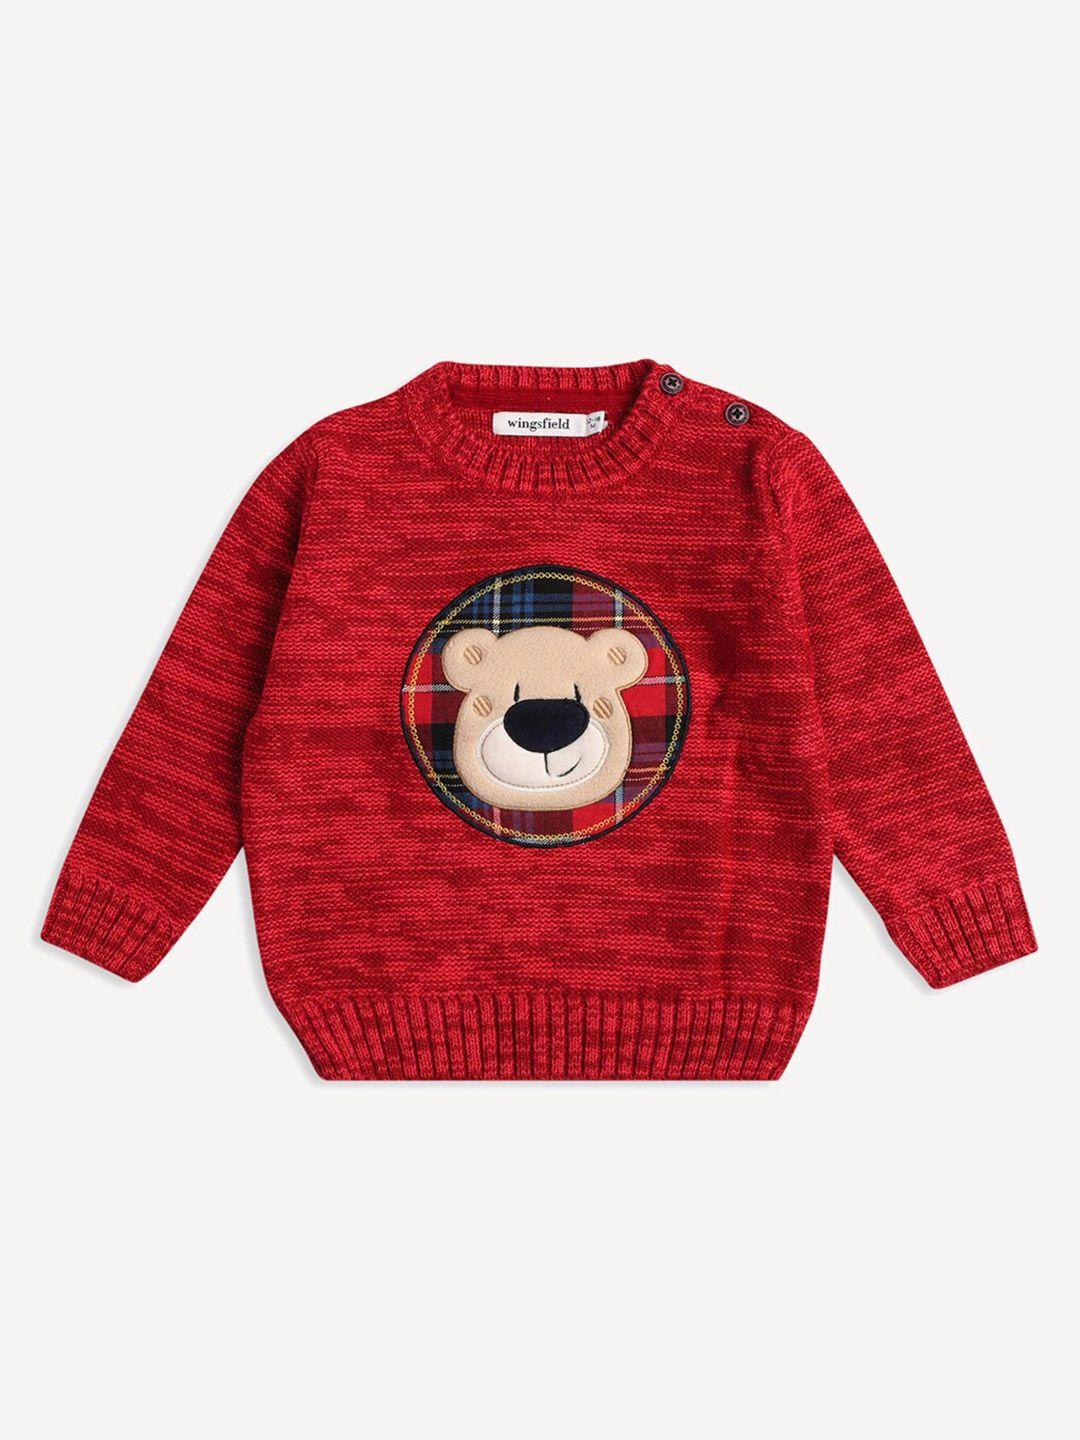 wingsfield-boys-embroidered-round-neck-long-sleeve-acrylic-pullover-sweaters